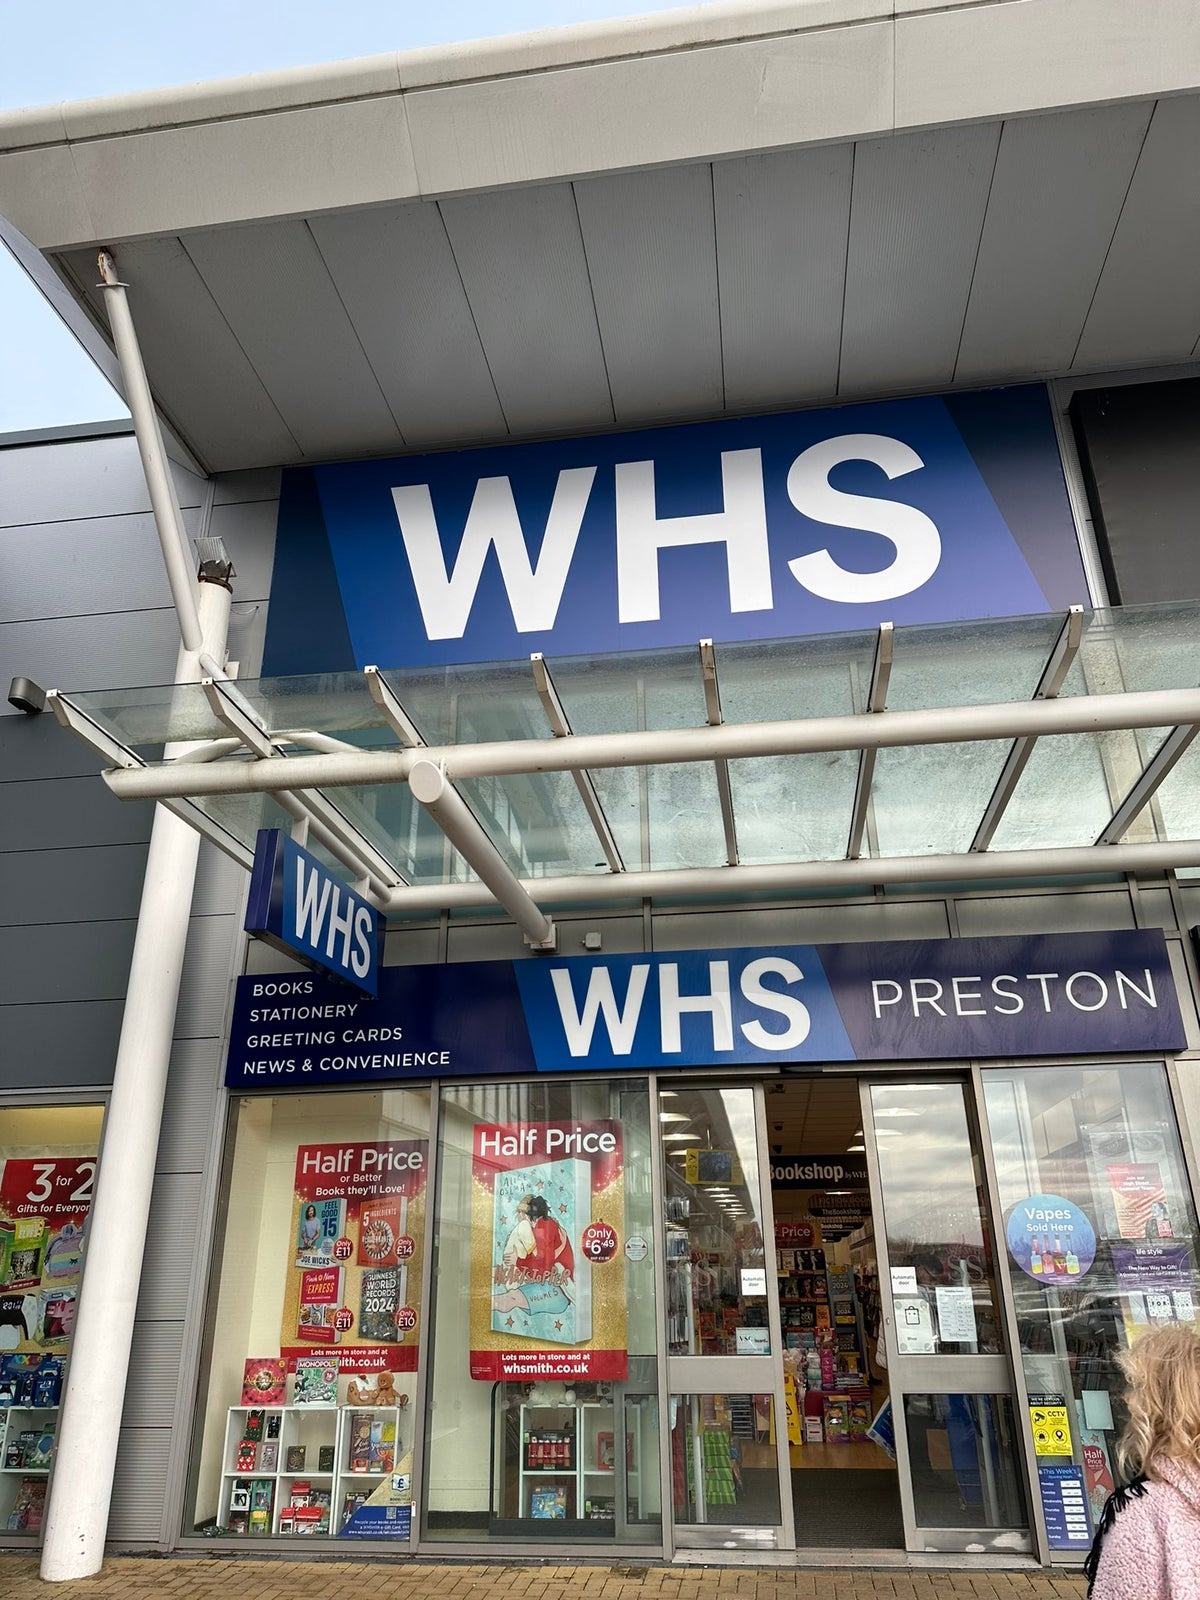 WH Smith faces ridicule after rebrand compared to NHS logo